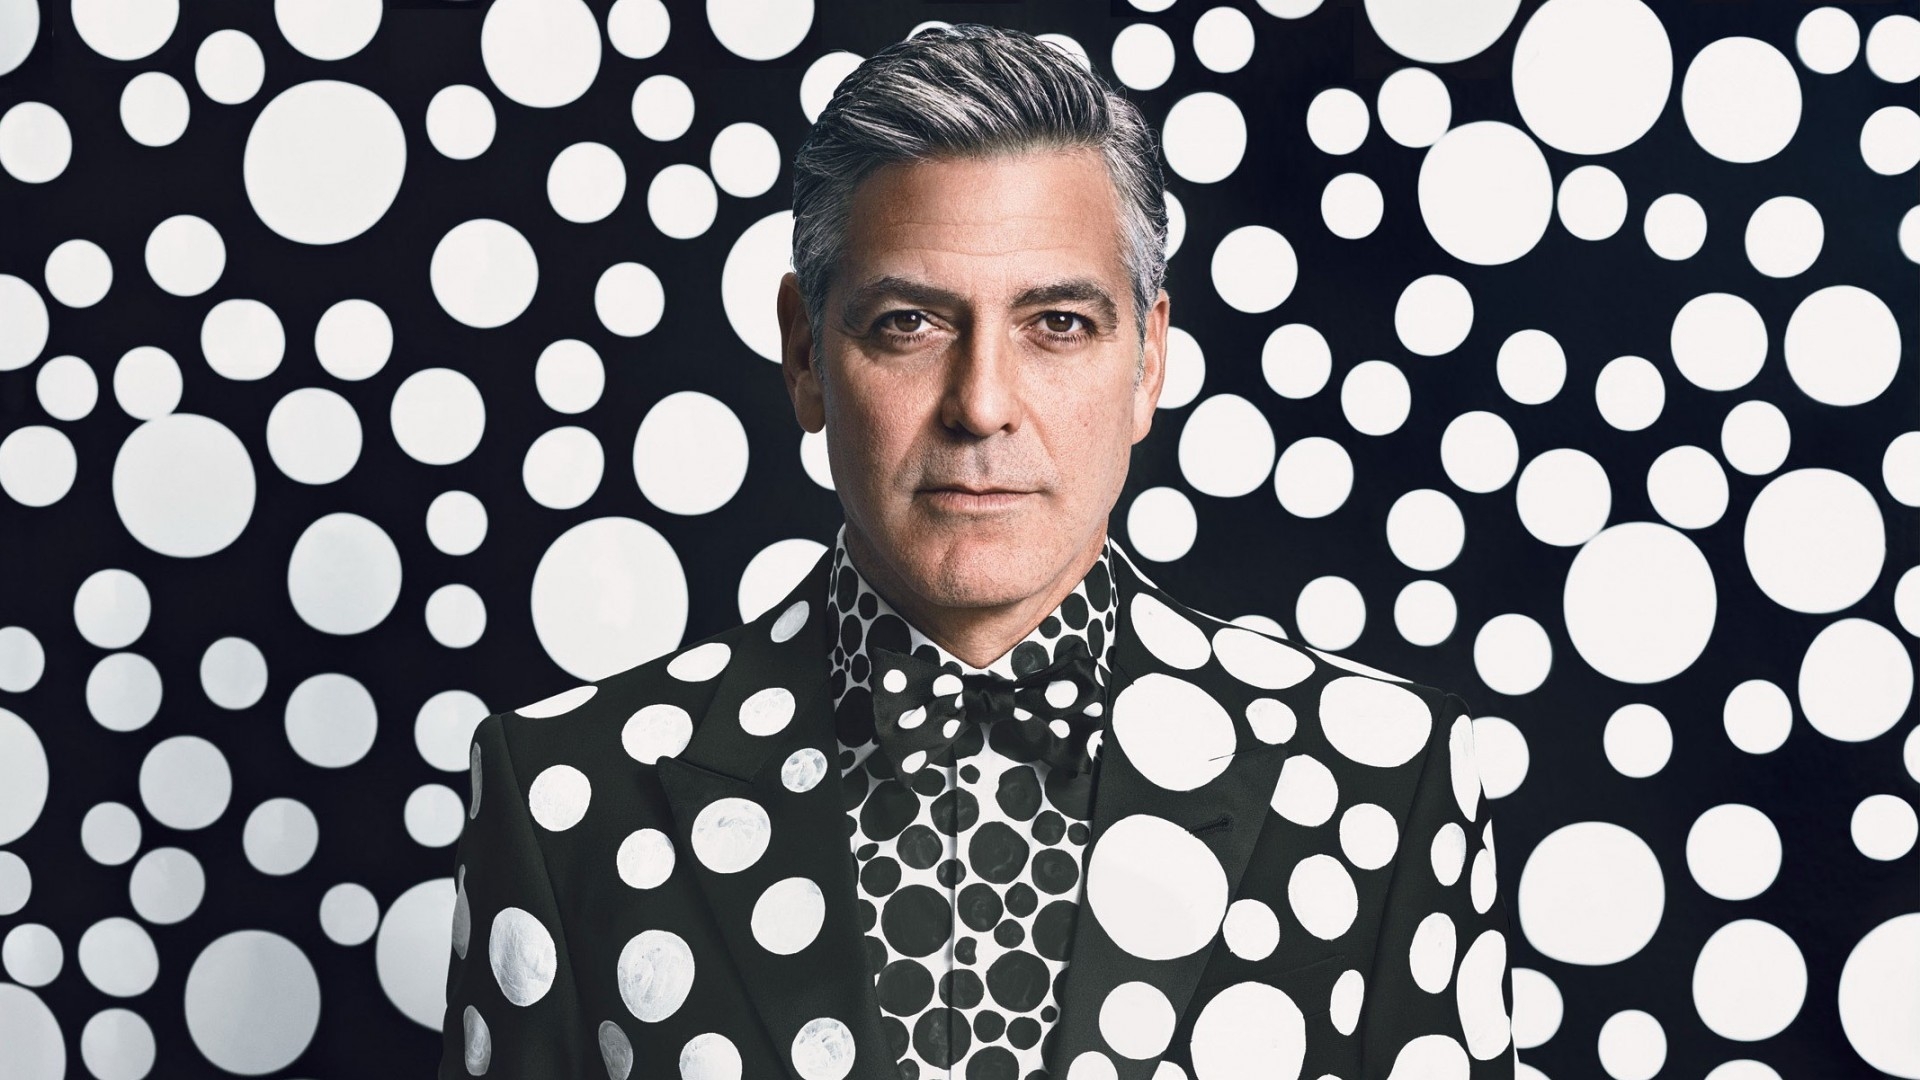 George Clooney Portrait for 1920 x 1080 HDTV 1080p resolution